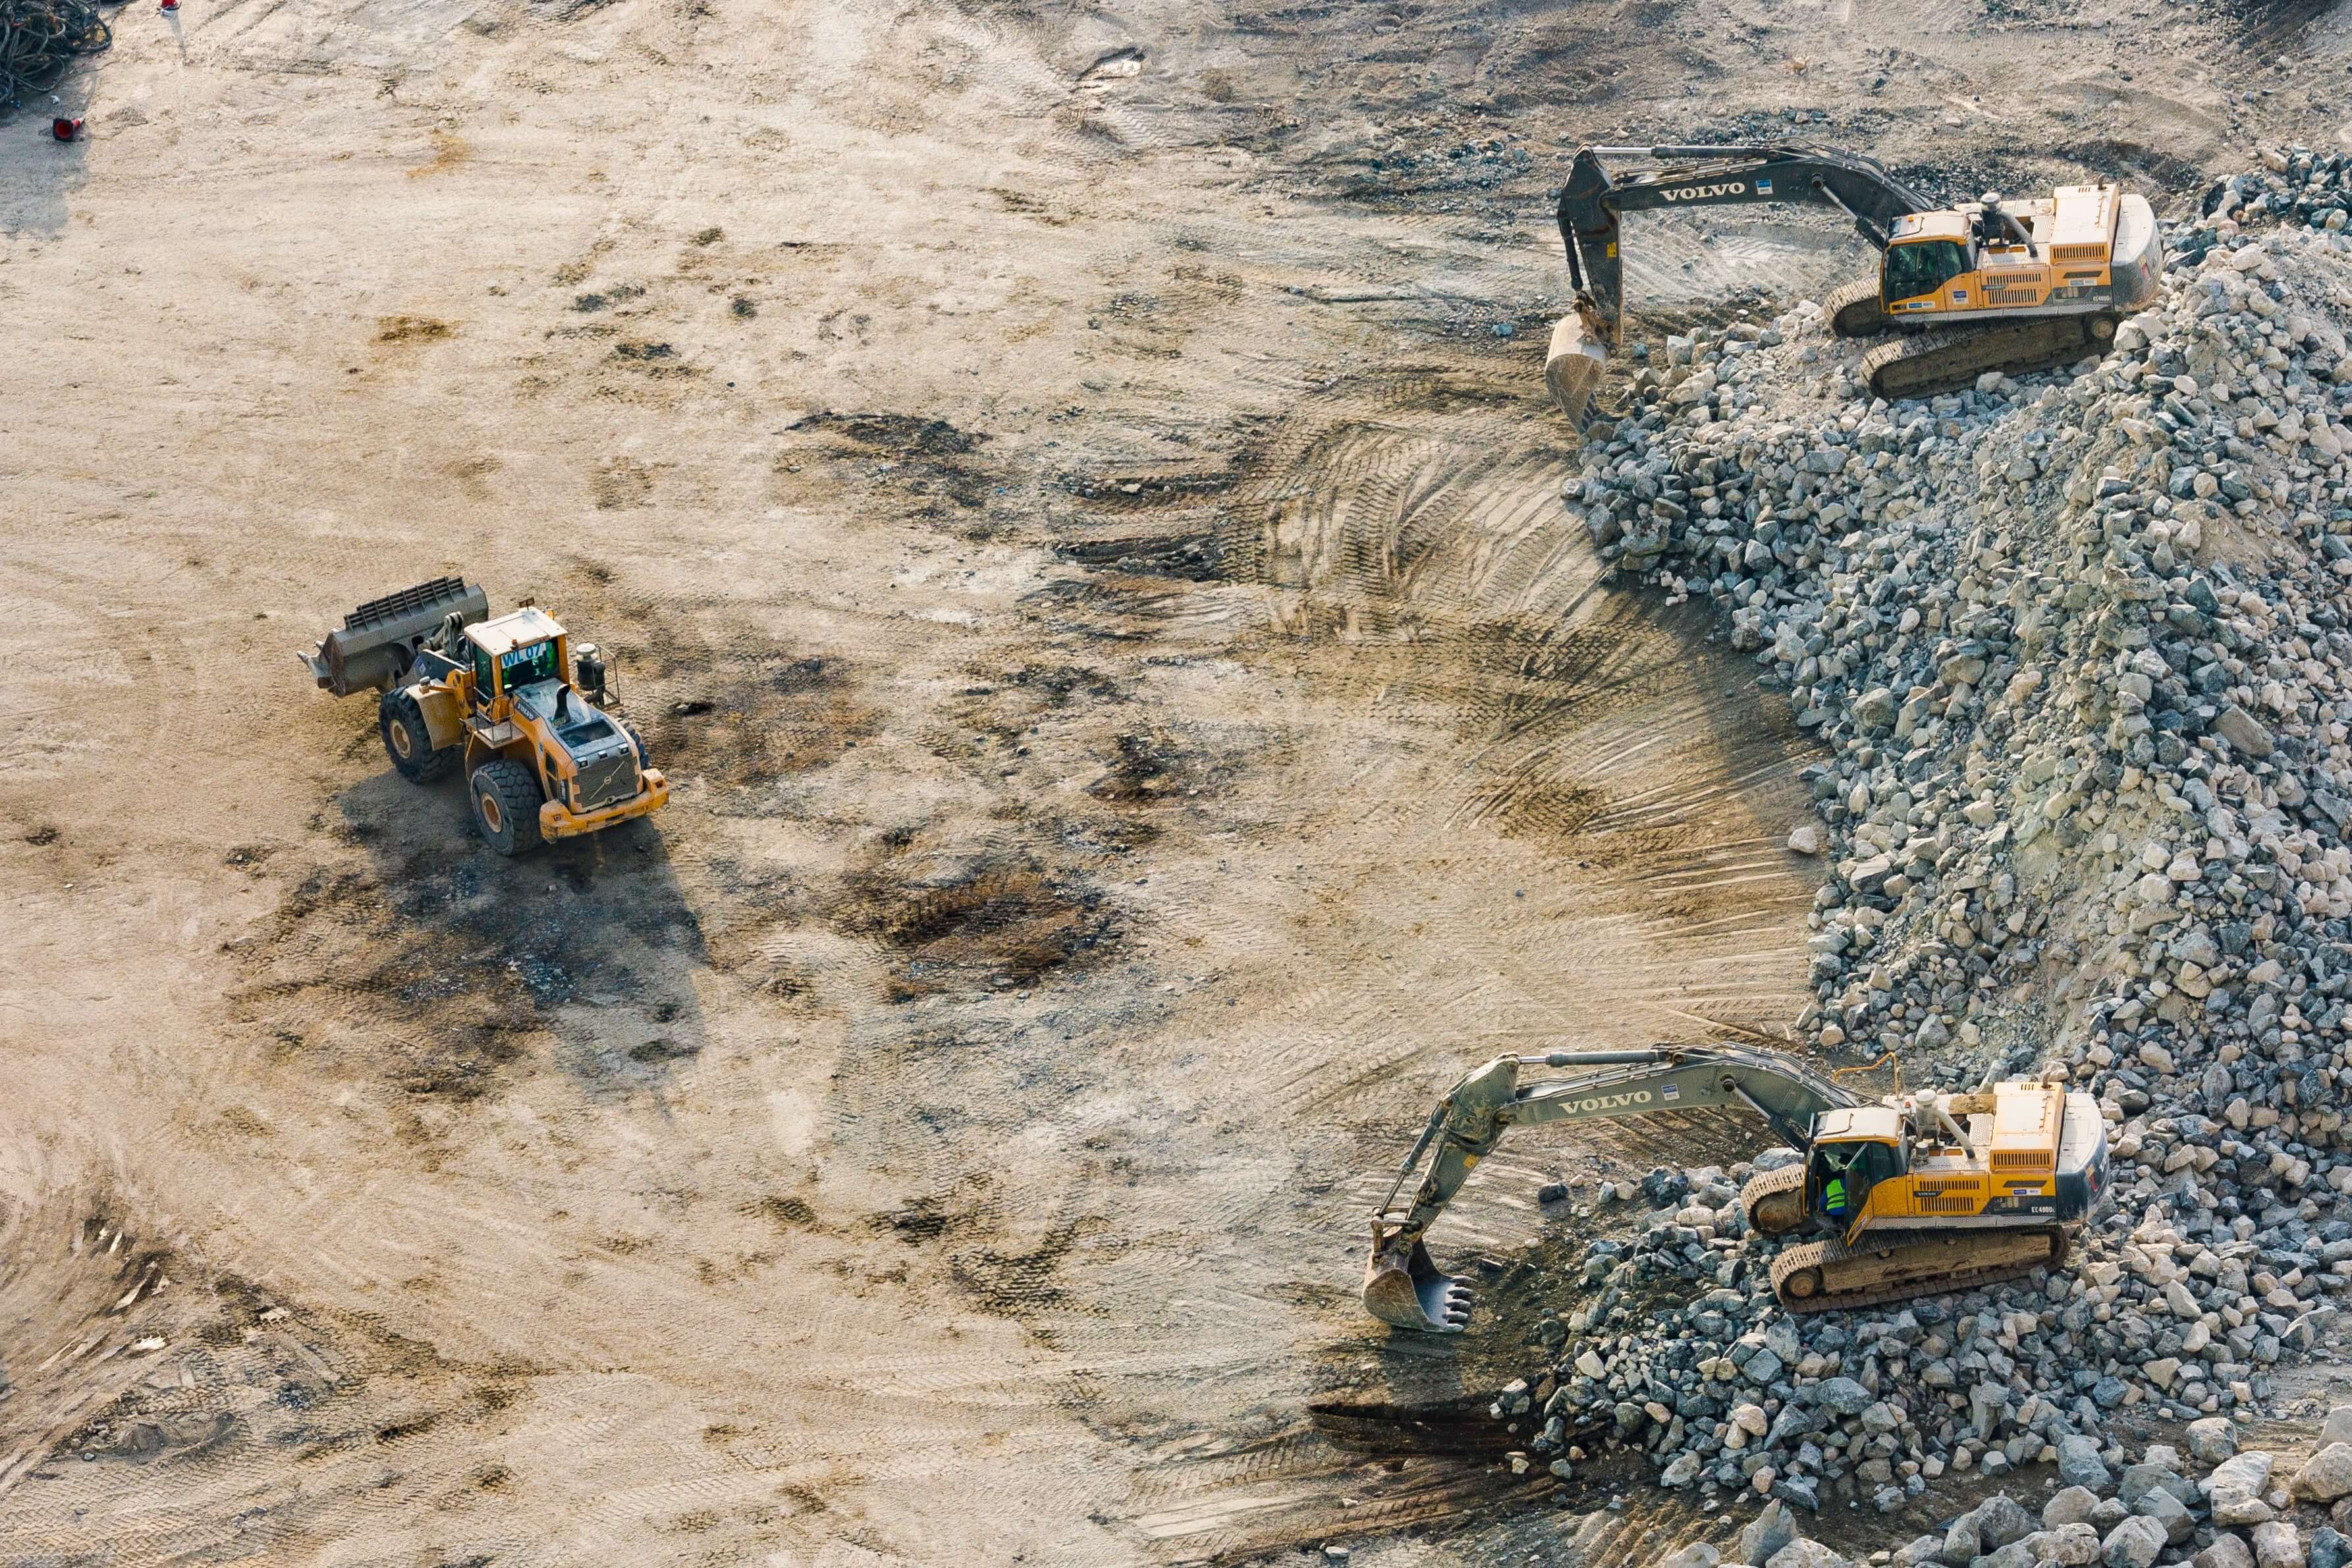 Illegal mining in the Amazon at unprecedented levels, high-tech mapping could thwart criminals